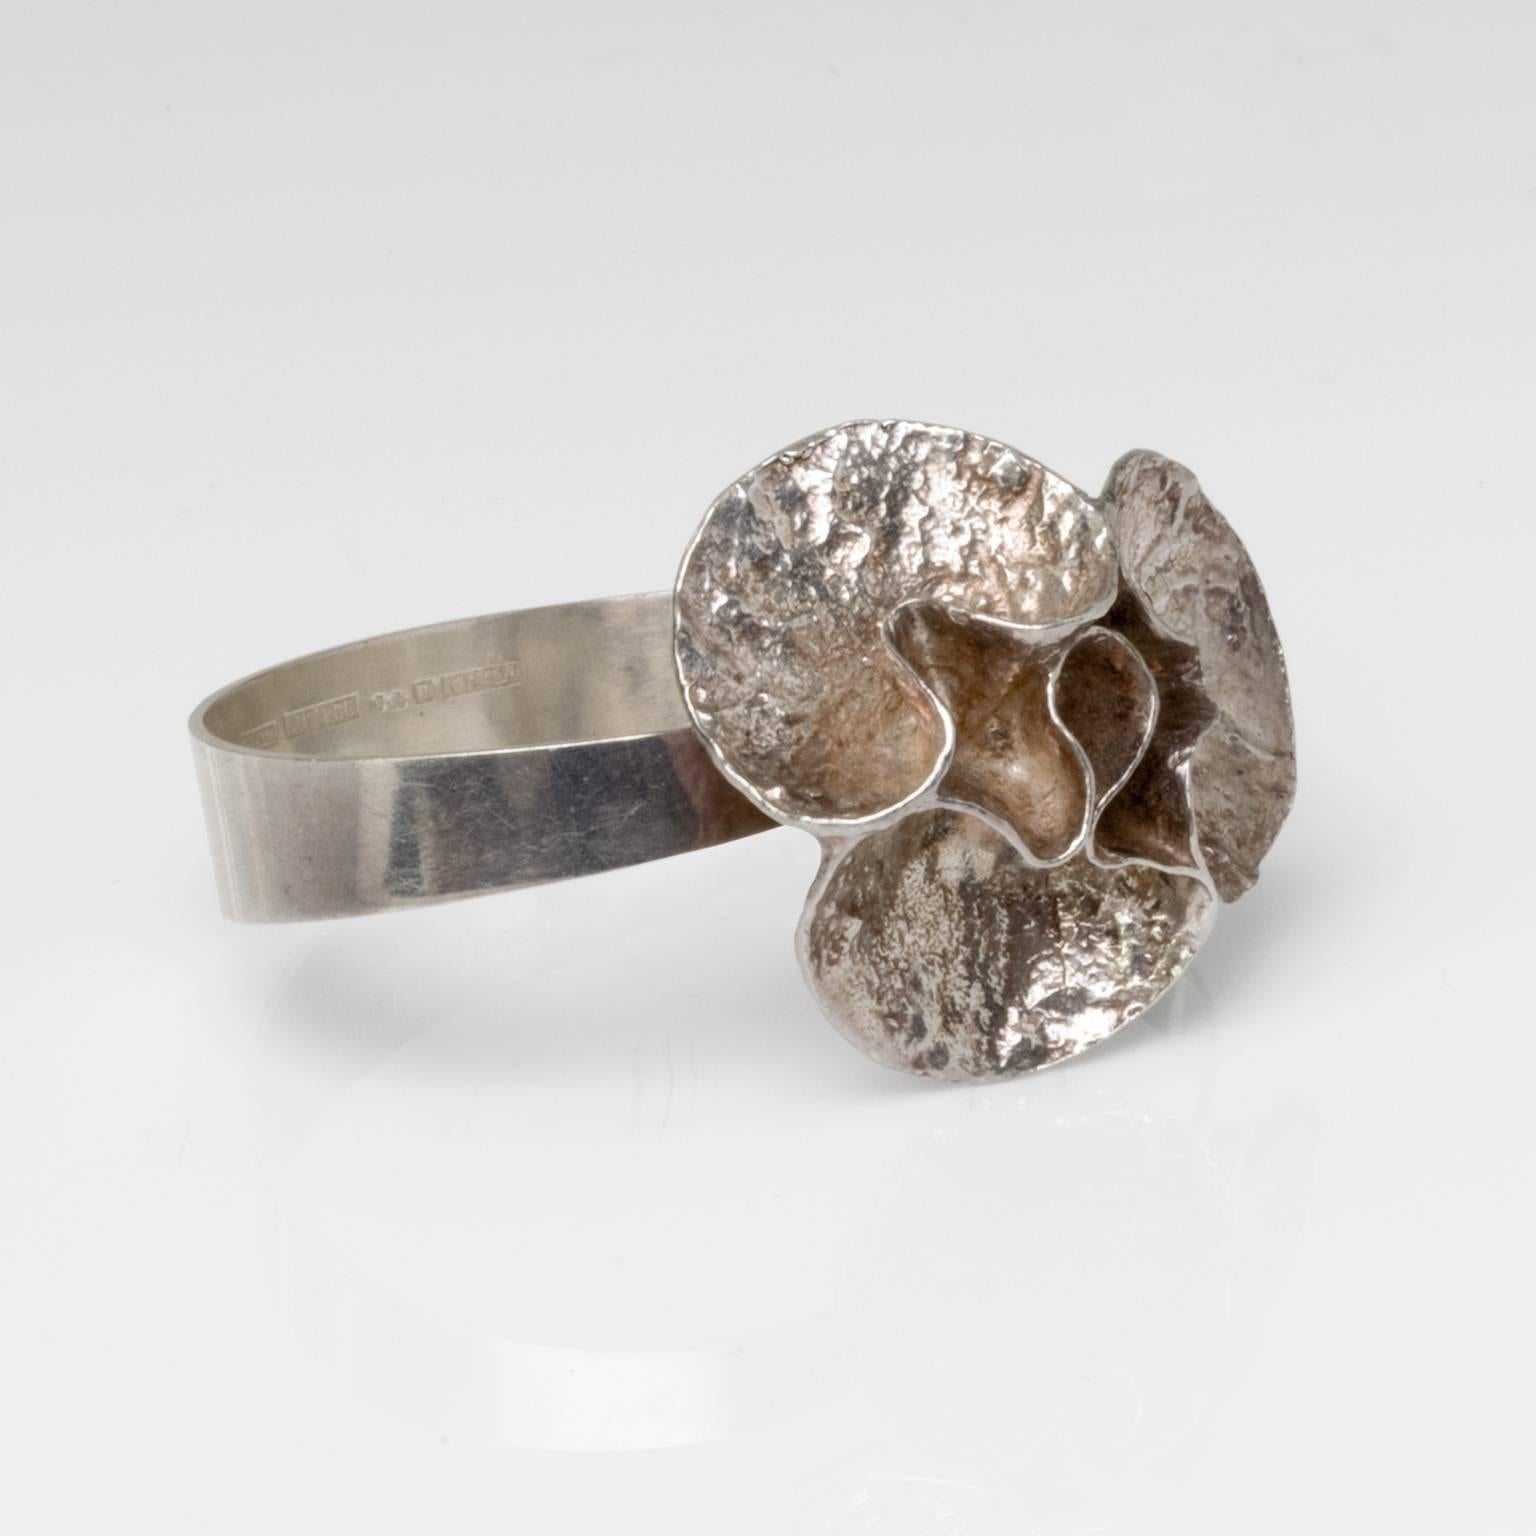 Silver bracelet with acid treated surface by Theresia Hvorslev and stamped 'Mema', Lidkoping, Sweden, 1976.
Measures: Depth: 2.75